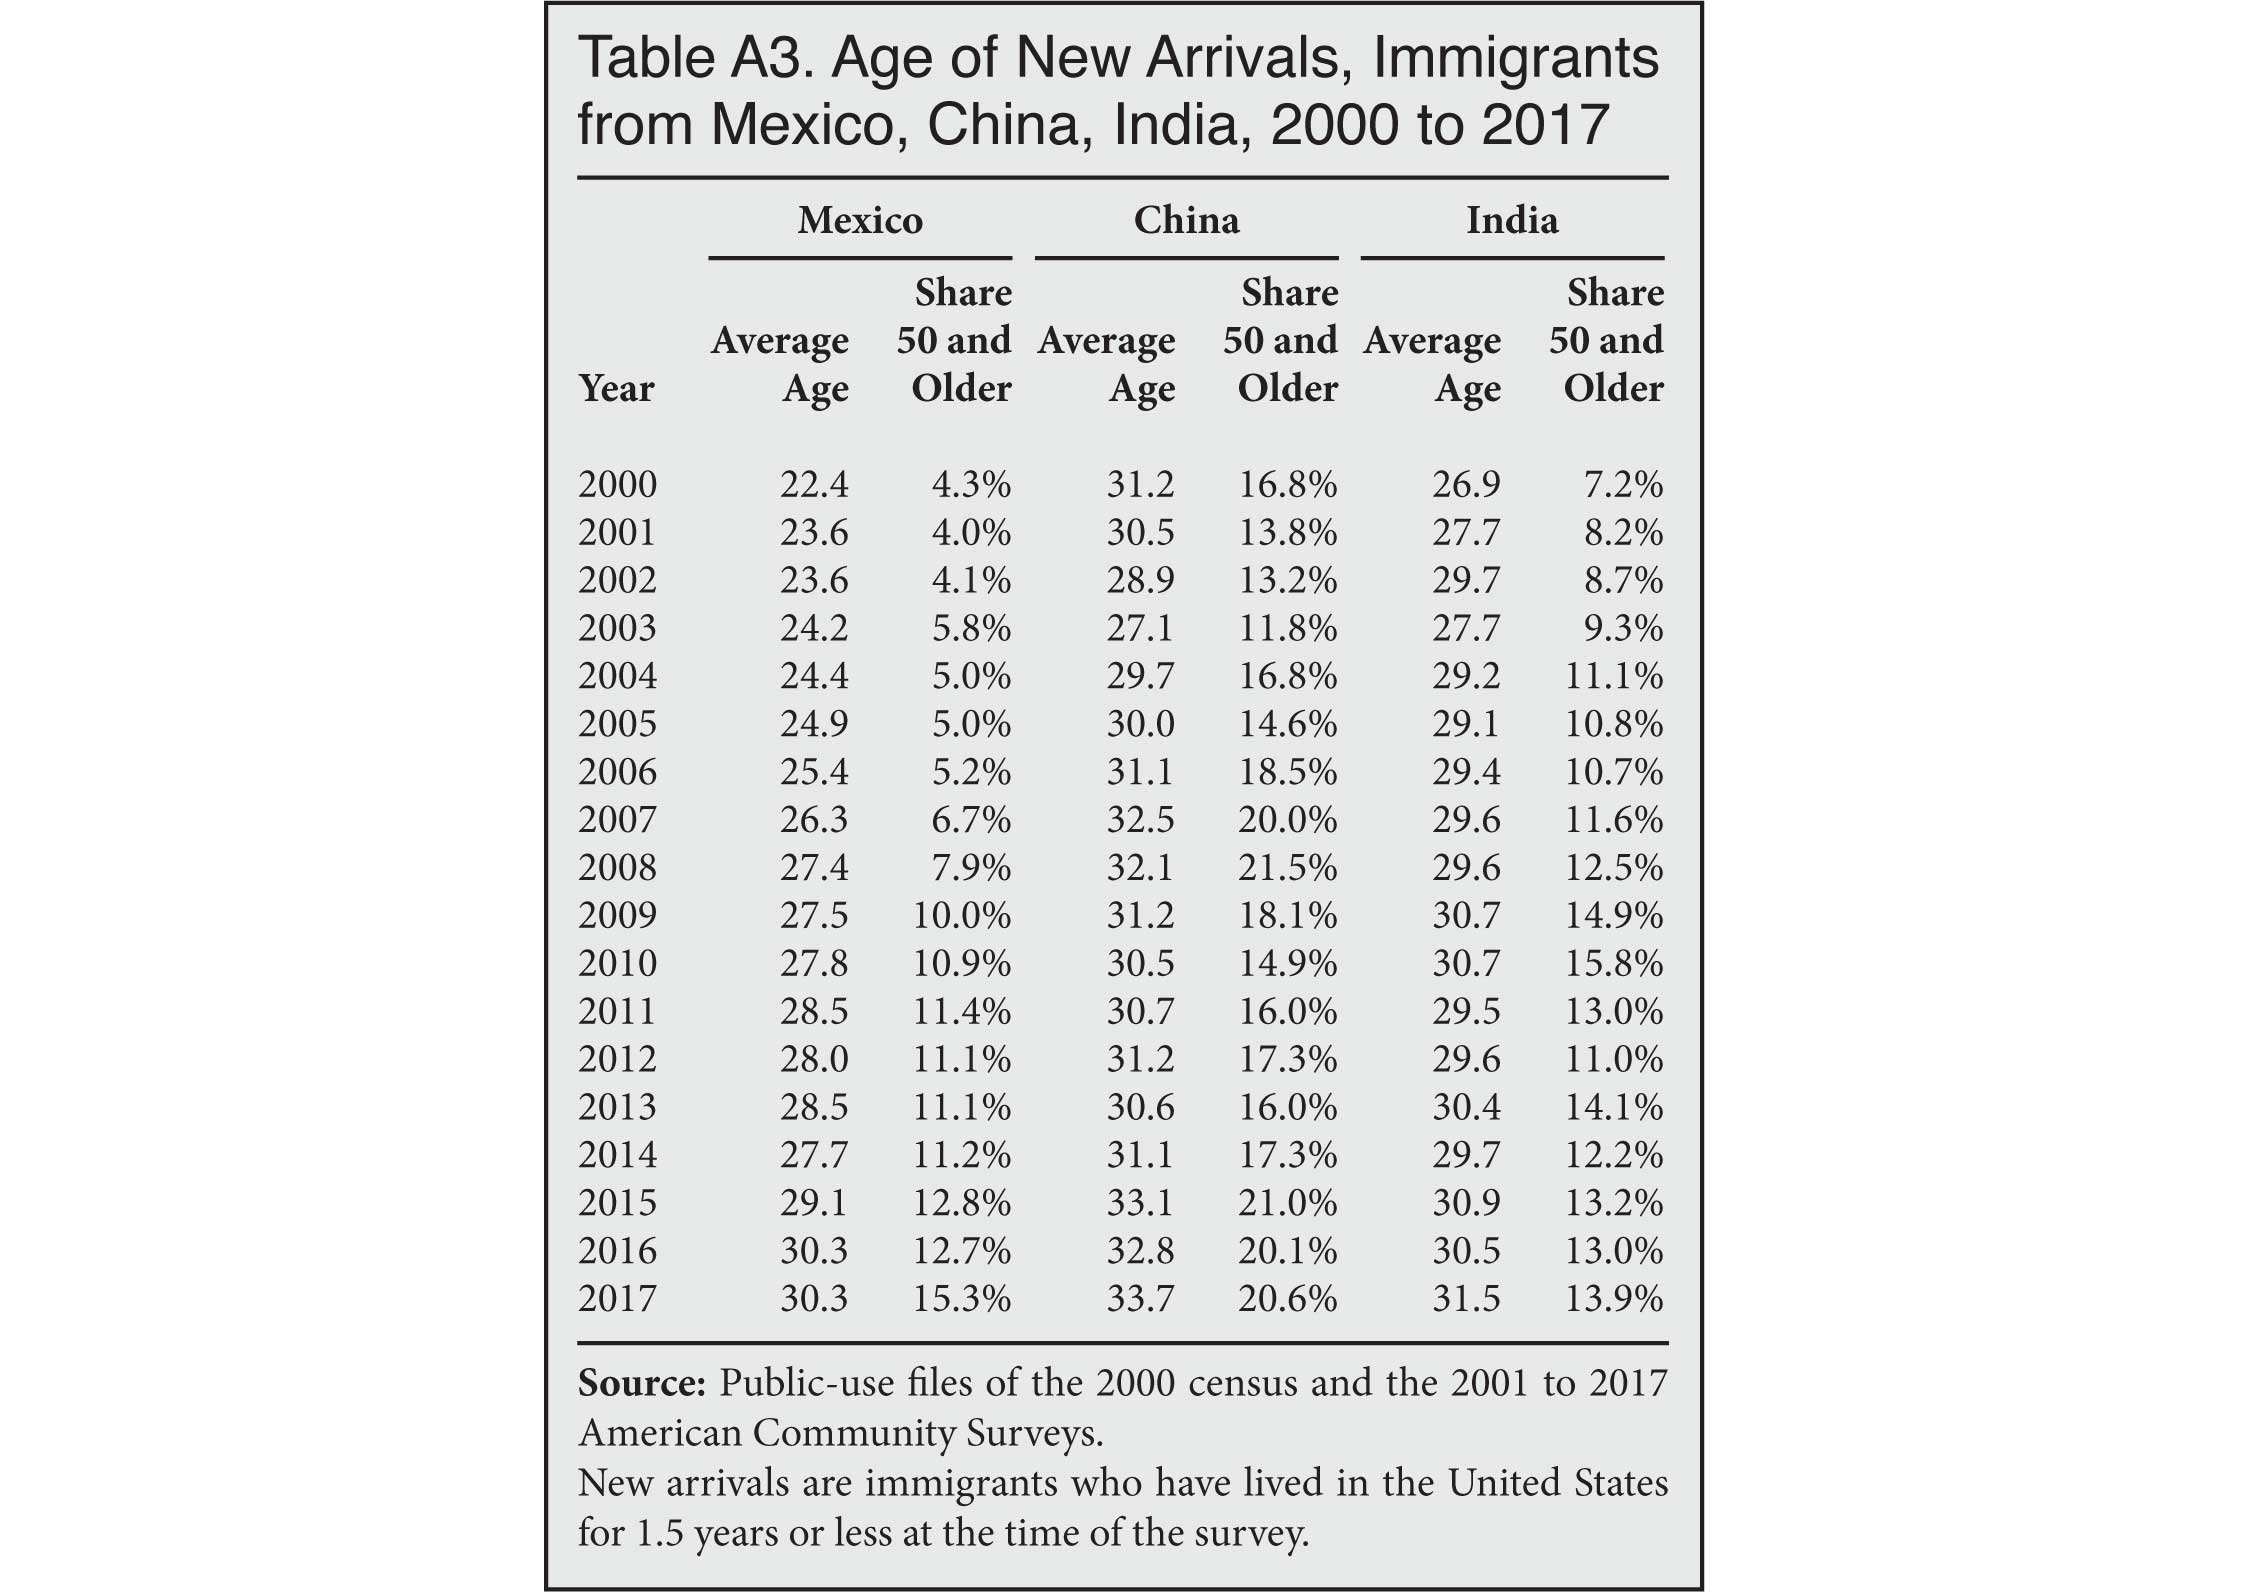 Table: Age of New Arrivals, Immigrants from Mexico, China, India, 2000 to 2017